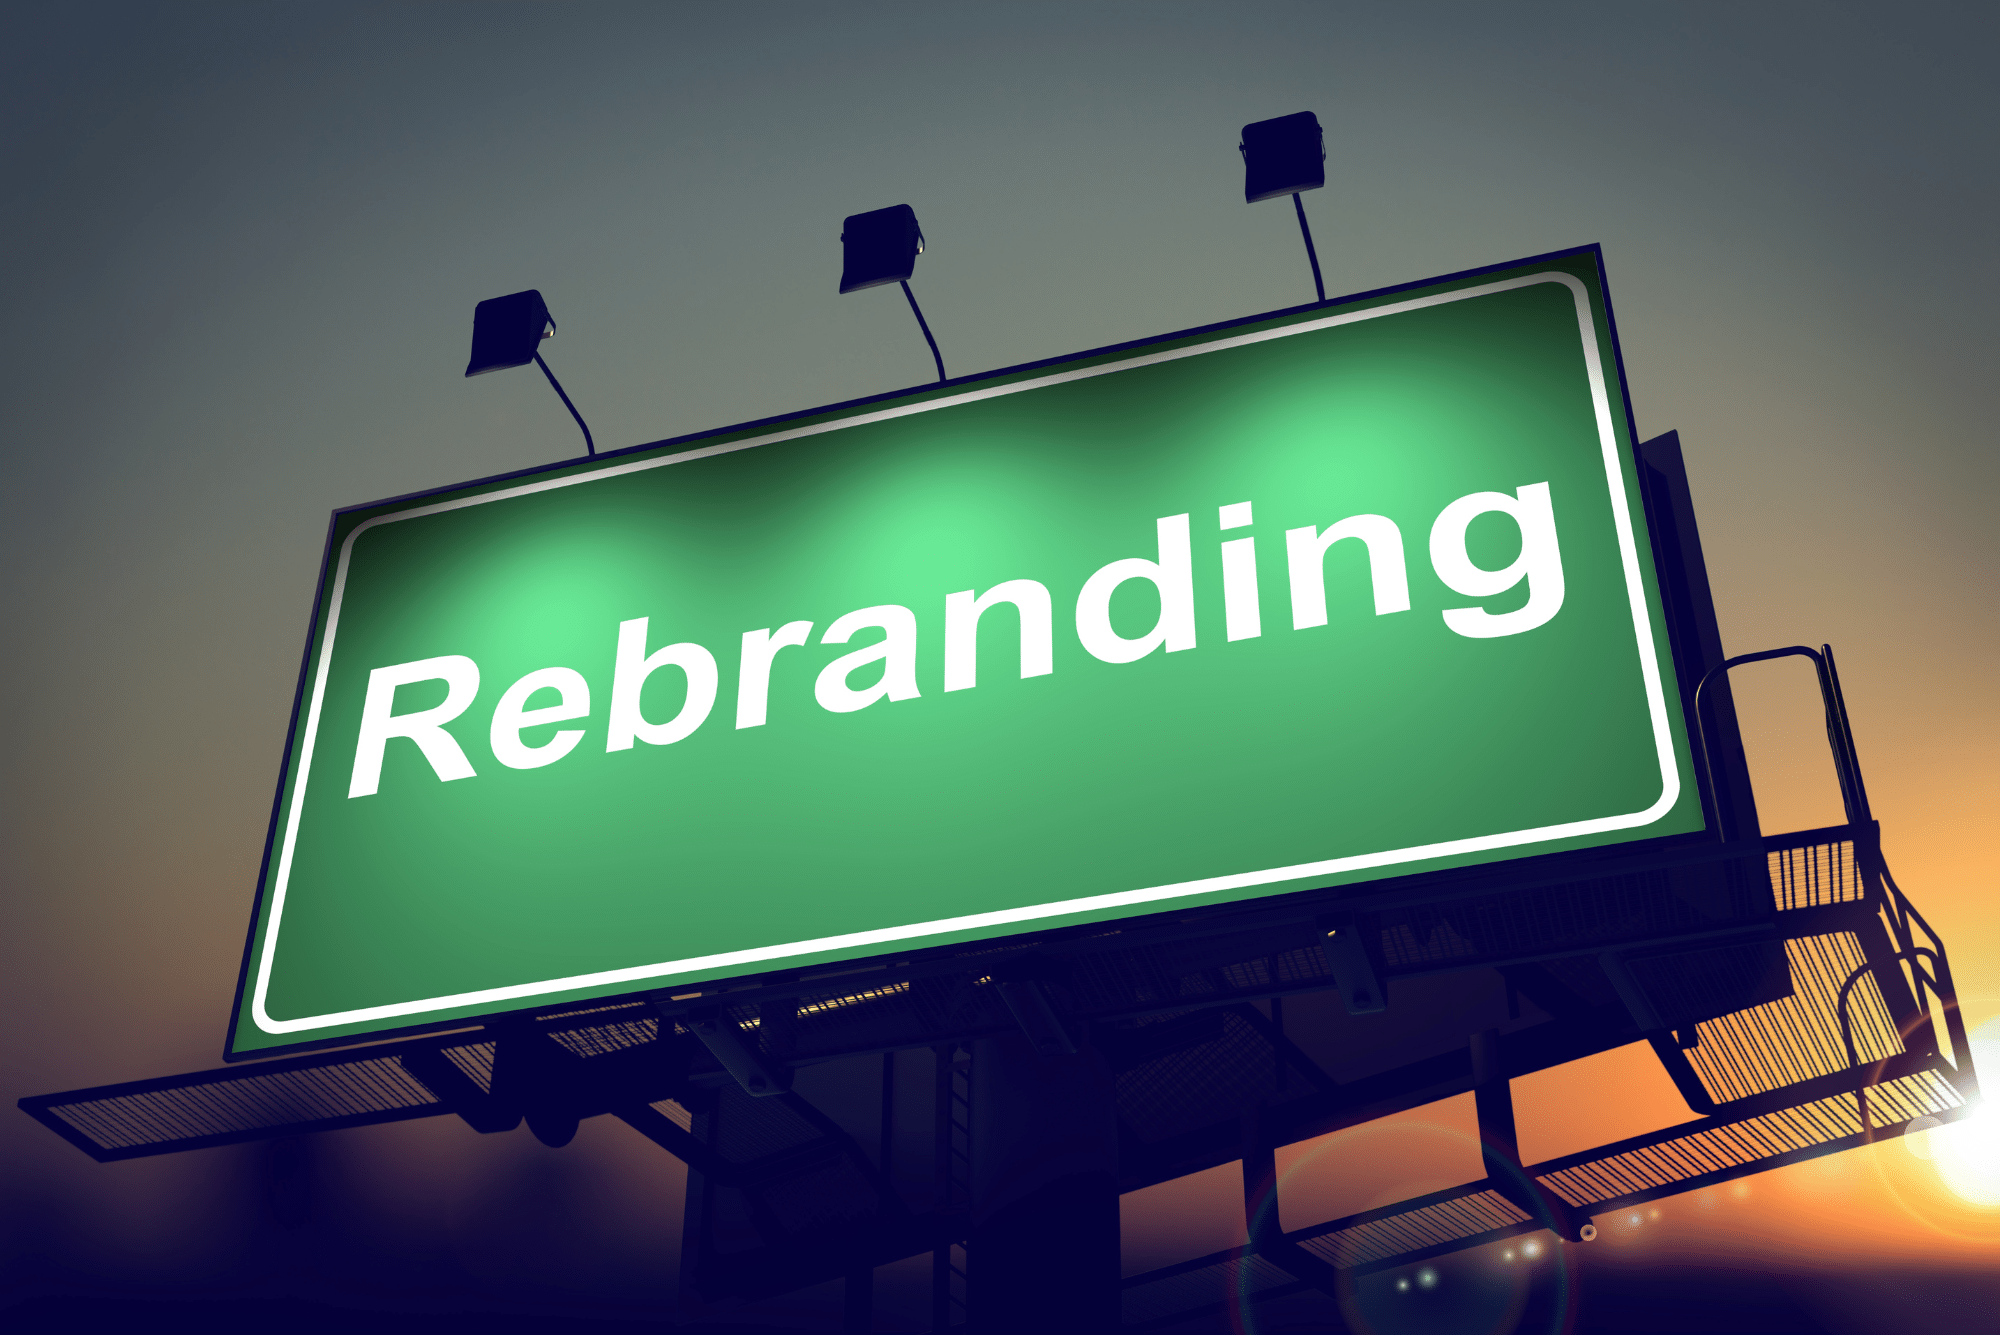 photo of a billboard with the word rebranding on it to help clients with business rebranding strategy